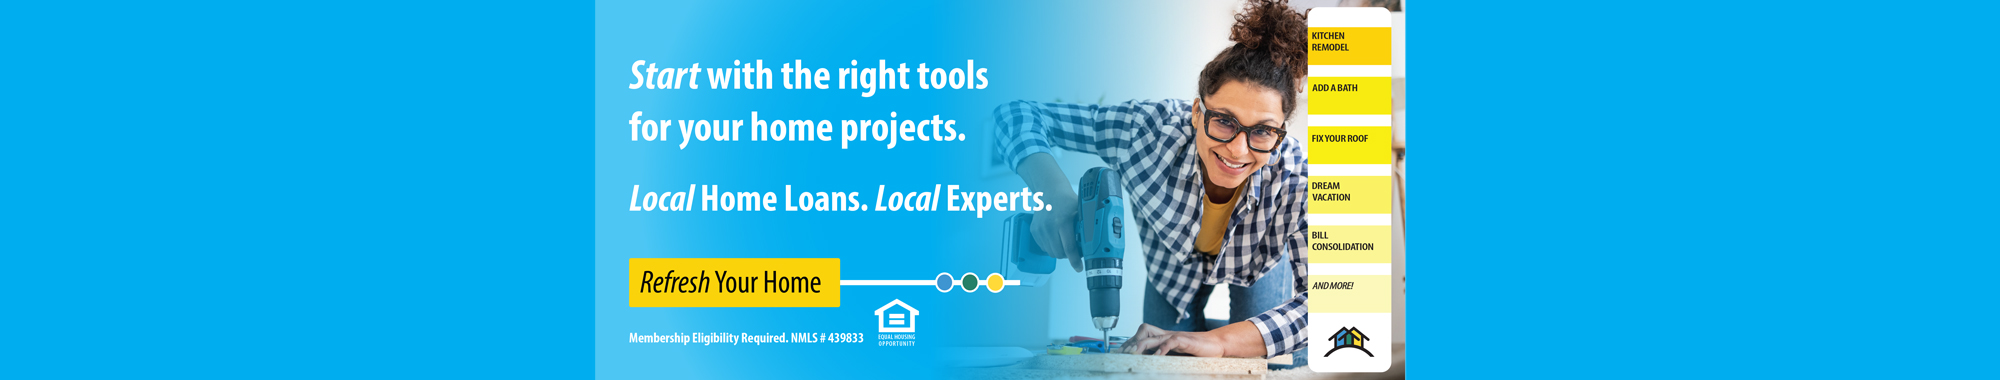 Start with the right tools for your home projects. Local Home Loans. Local Experts. Refresh Your Home.